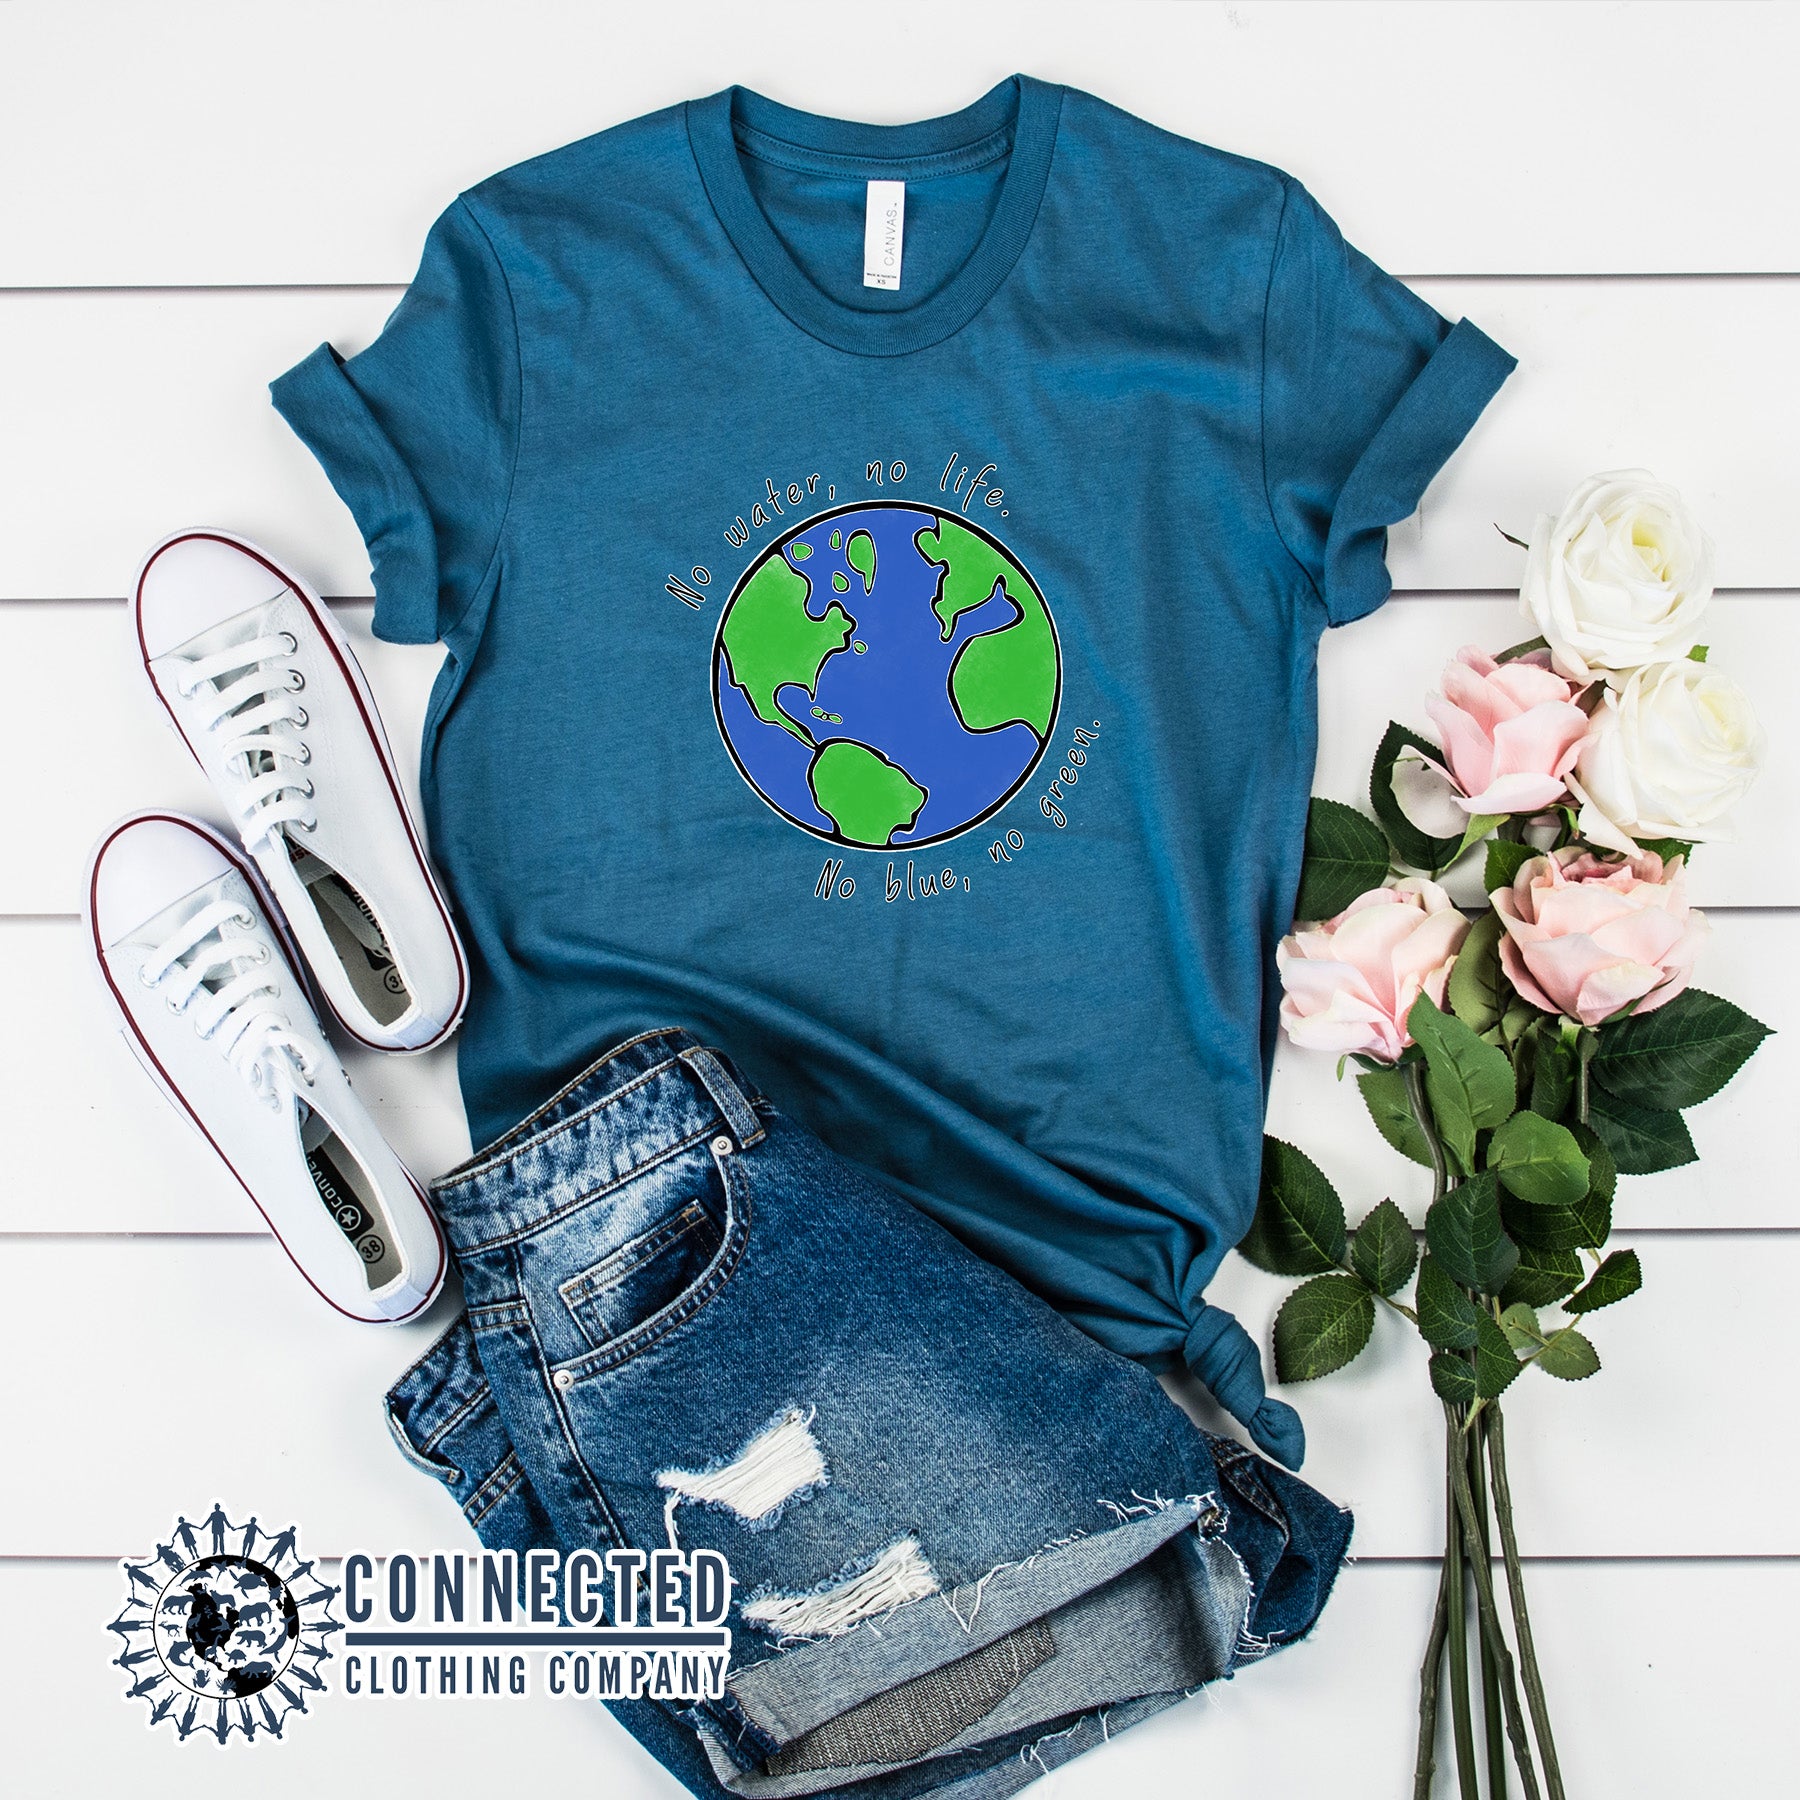 Steel Blue No Blue No Green Short-Sleeve Tee - Connected Clothing Company - Ethically and sustainably made -  10% of profits donated to ocean conservation